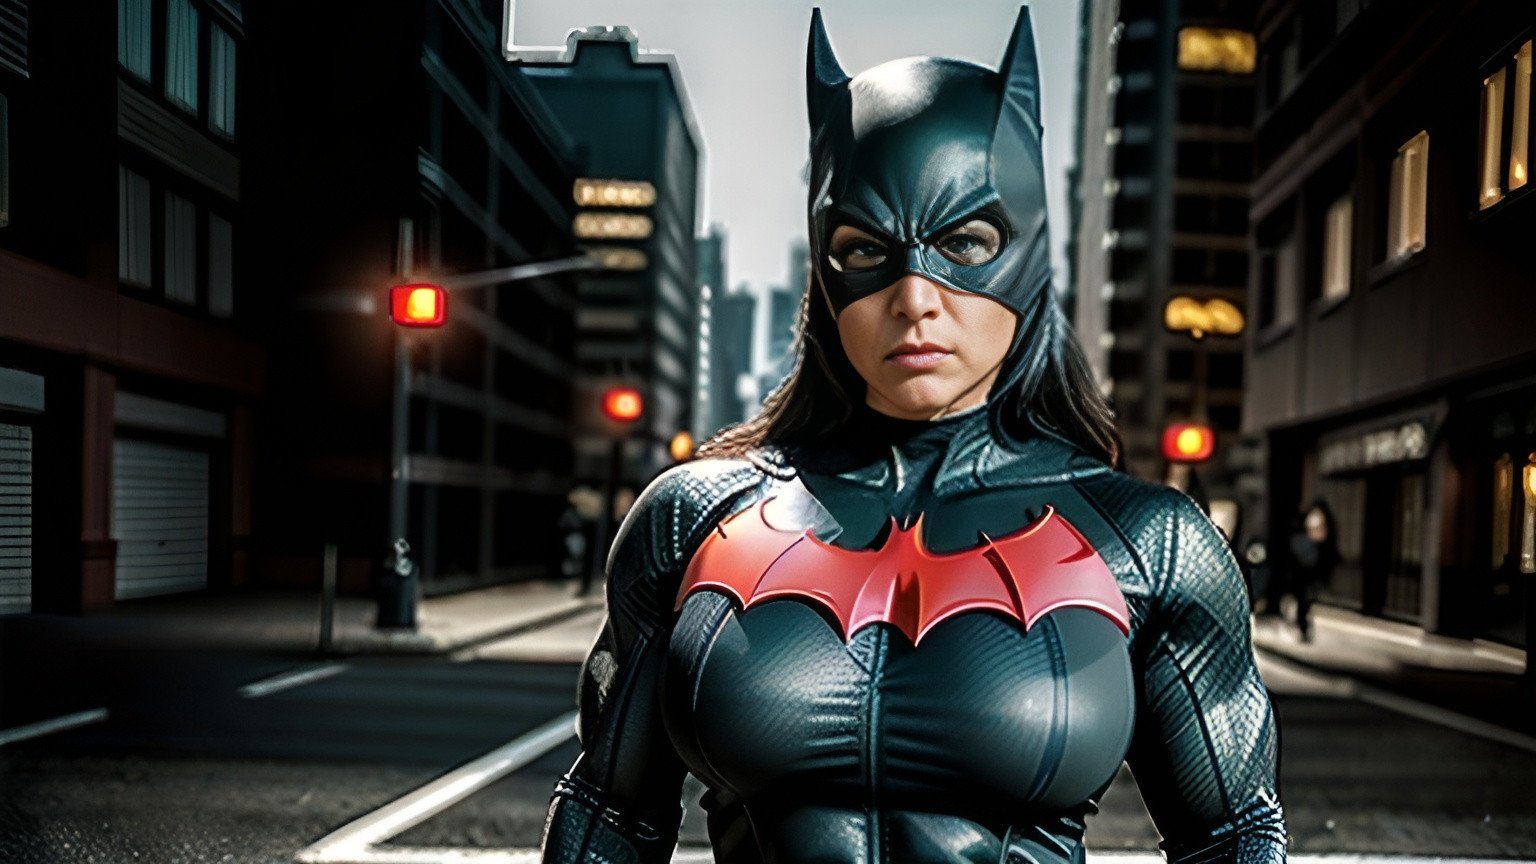 Prompt: Ultra realistic image of angry, muscular batwoman, age 40, wearing tight spandex costume, clenched fists, detailed, HD quality, full body, intense scowl, curvy physique, muscular arms, muscular thighs, realistic lighting, high contrast, professional, realistic details, high-res, superhero, intense expression, dark empty street background